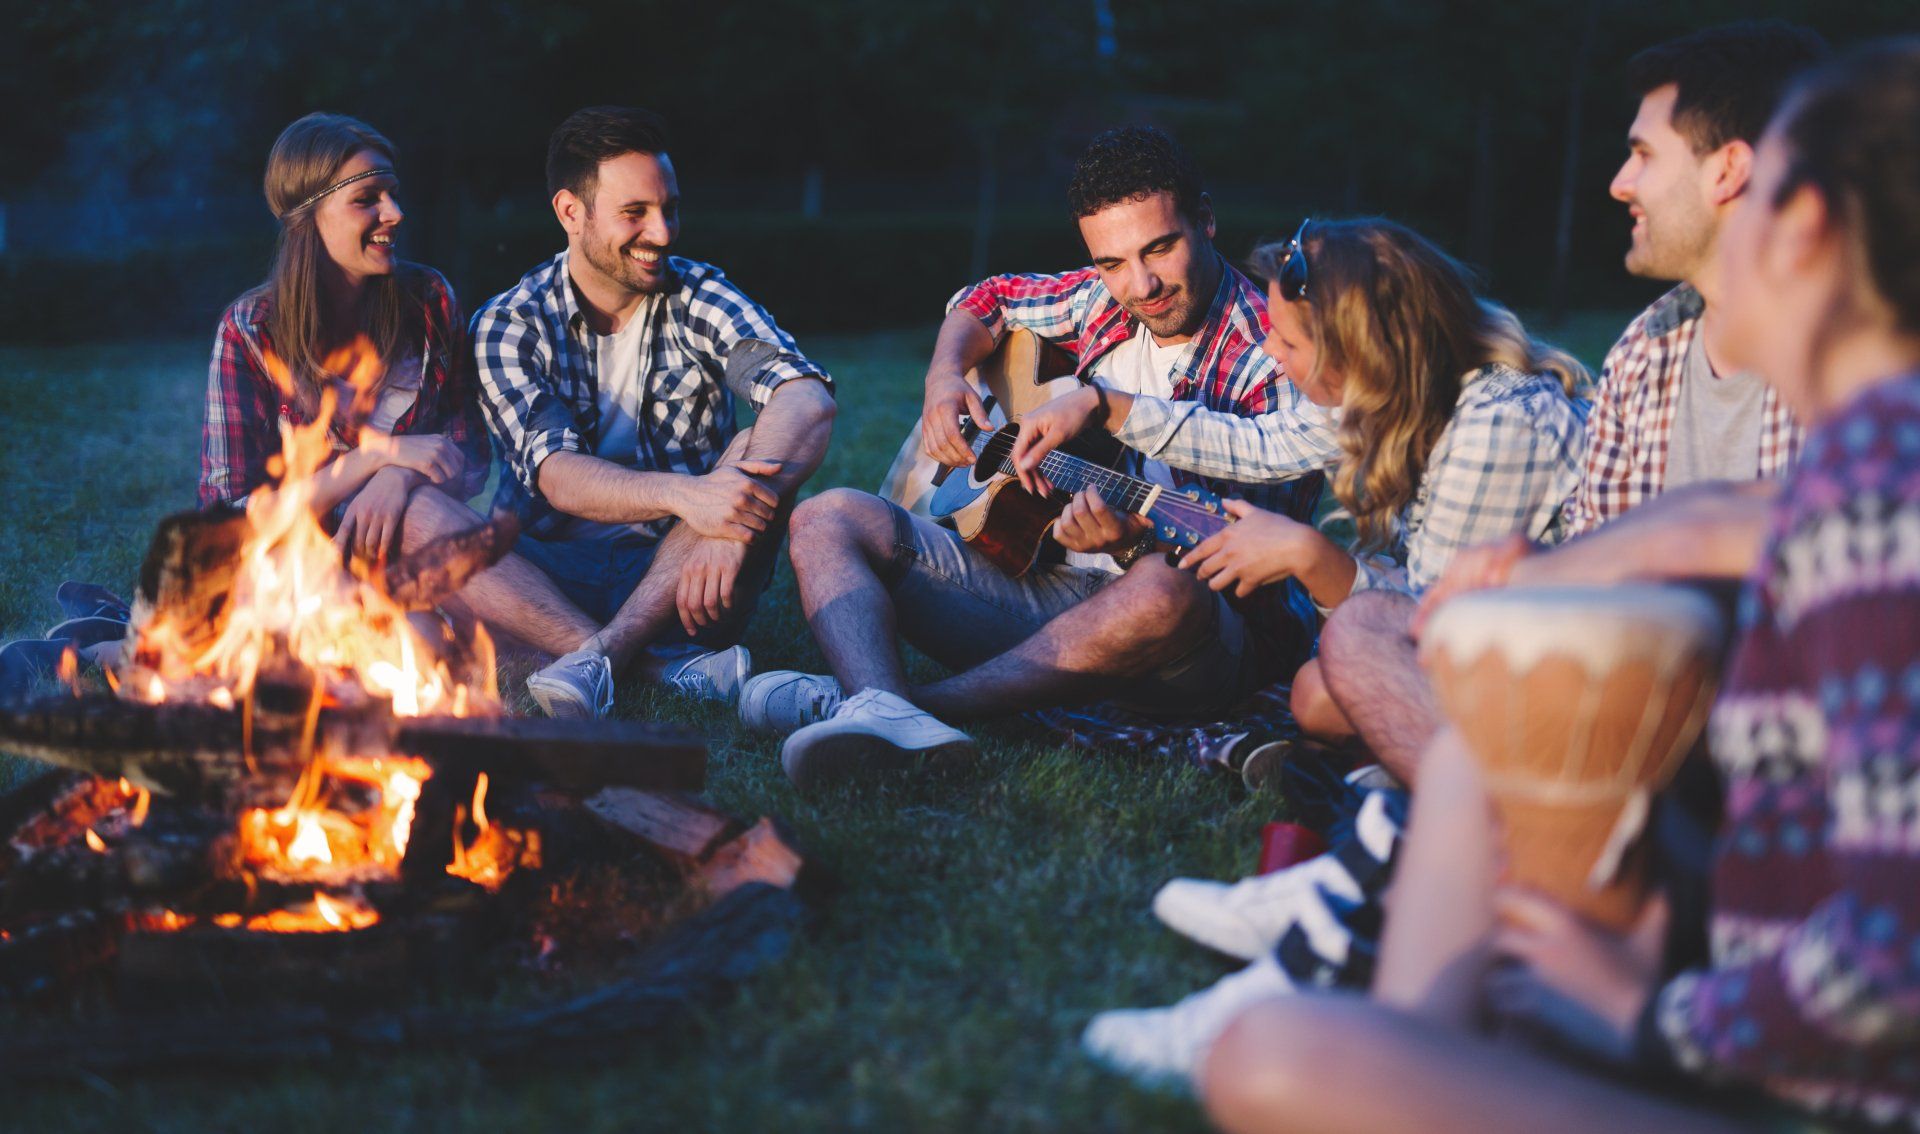 Navigating anxiety by hanging out with friends around a bonfire